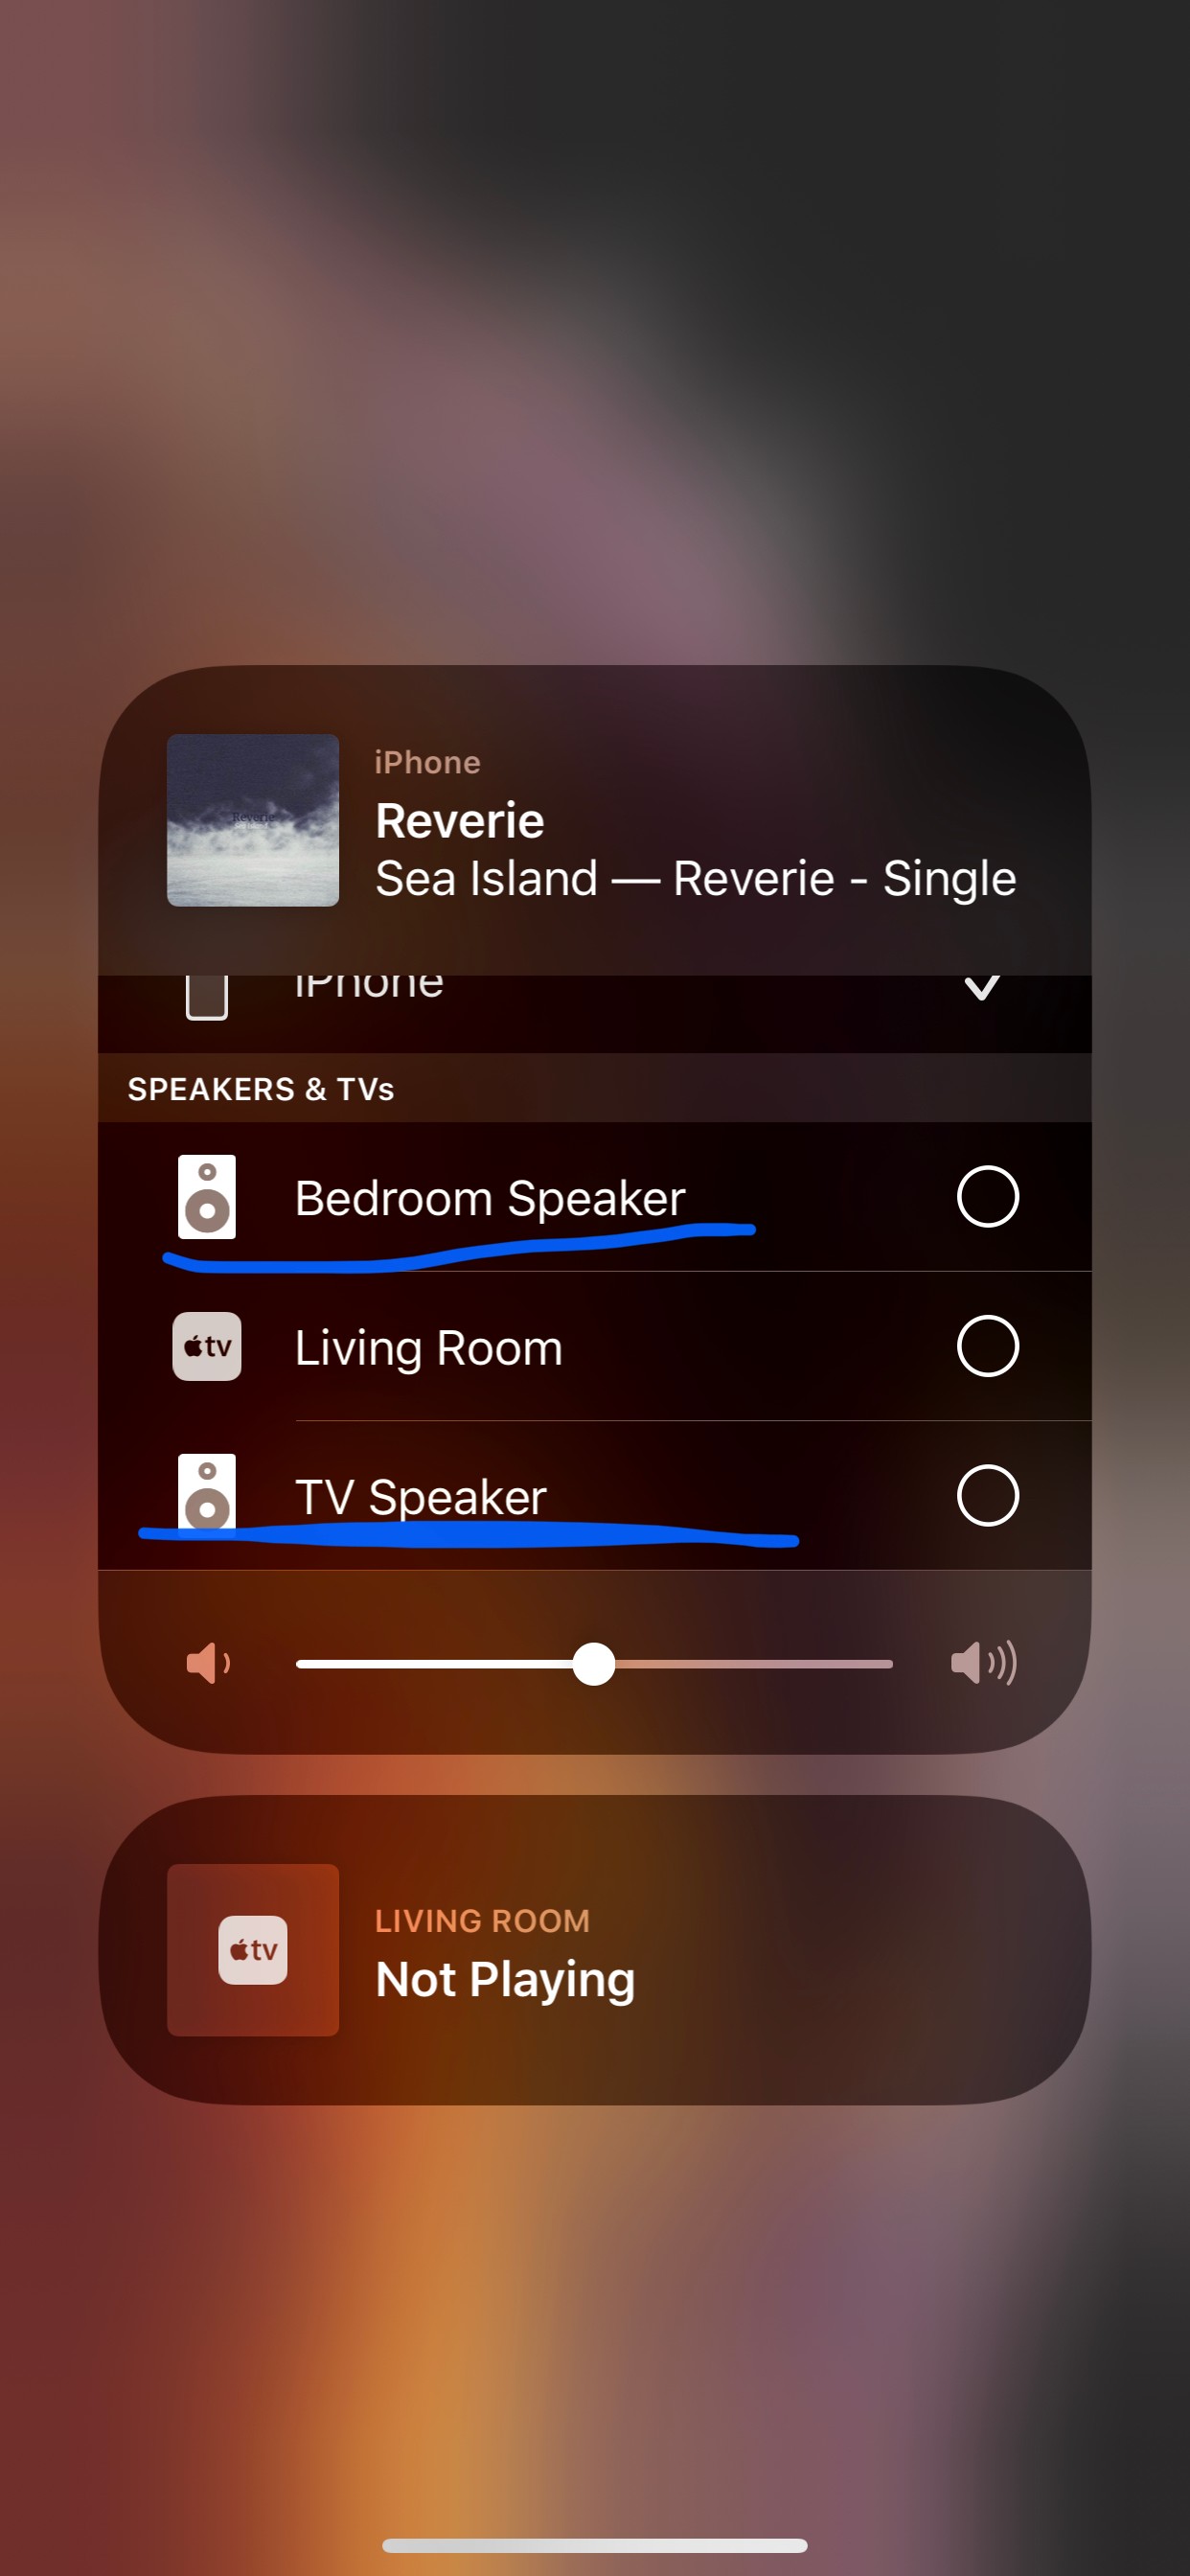 Absorbere Sparsommelig Opera Sonos Airplay speakers not showing on iMa… - Apple Community